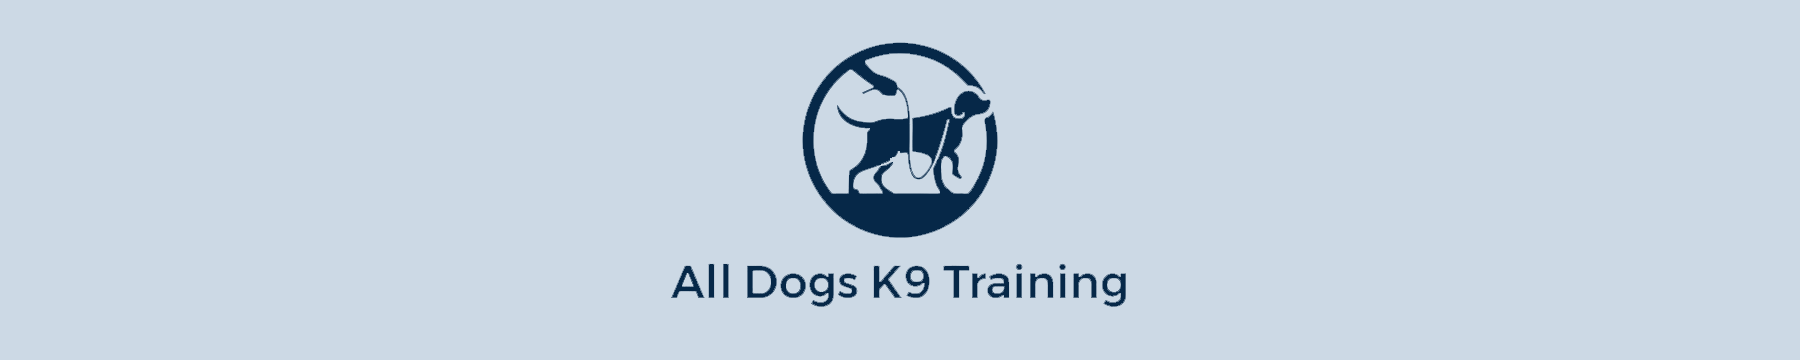 All Dogs K9 Training